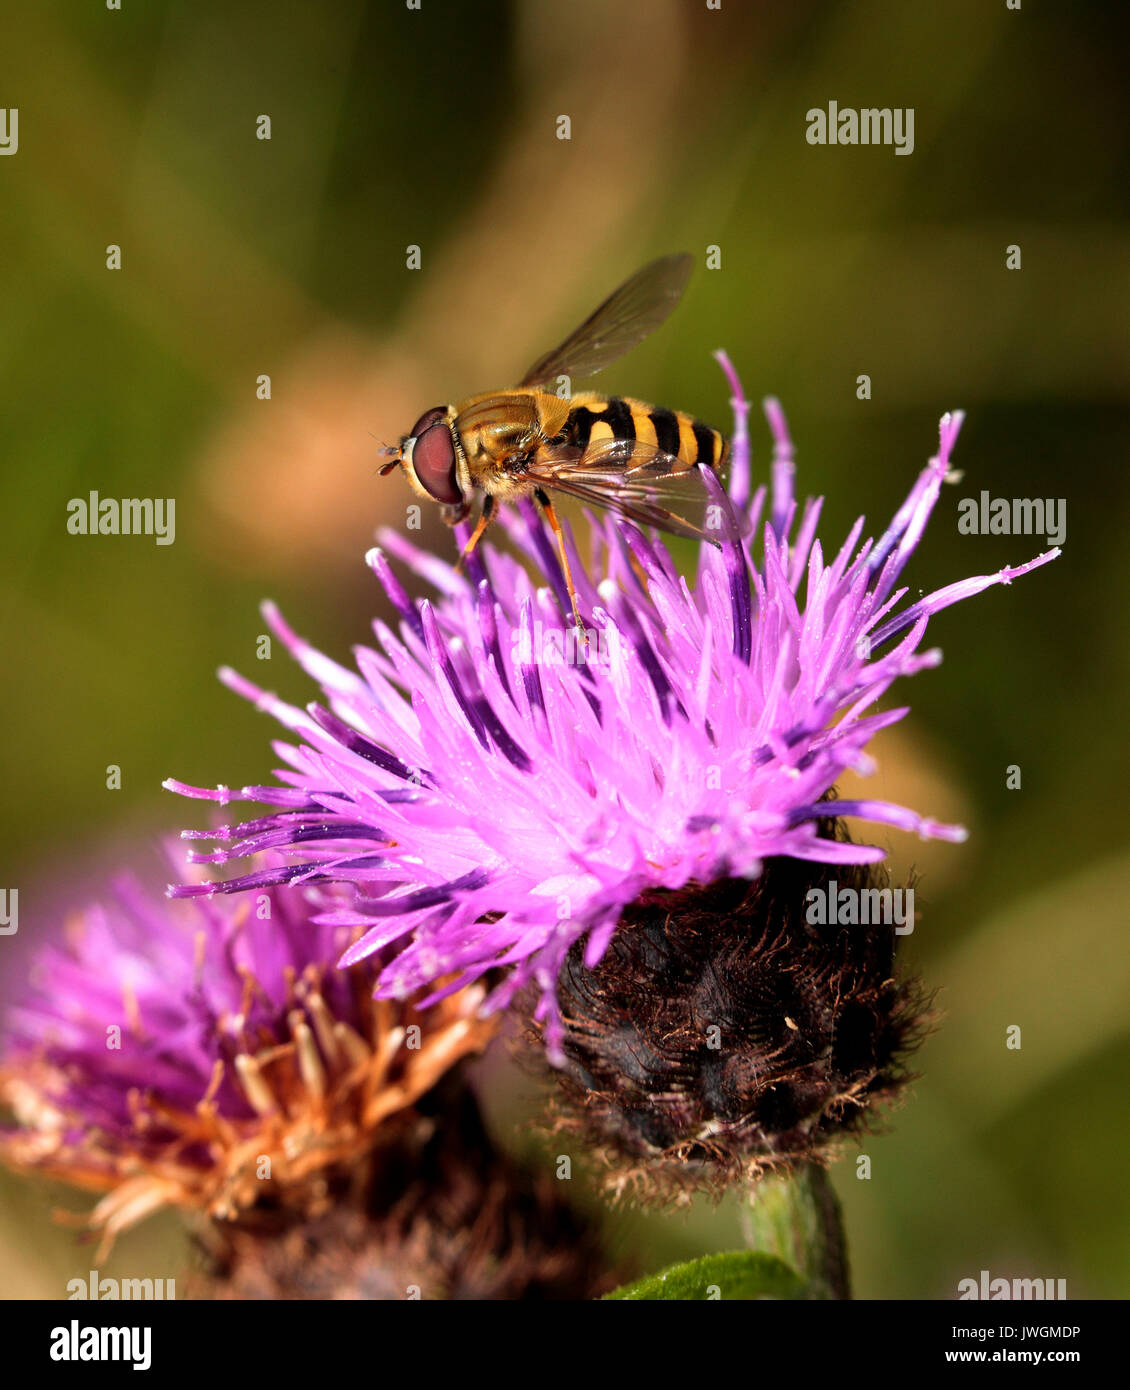 Common Banded Hoverfly Stock Photo